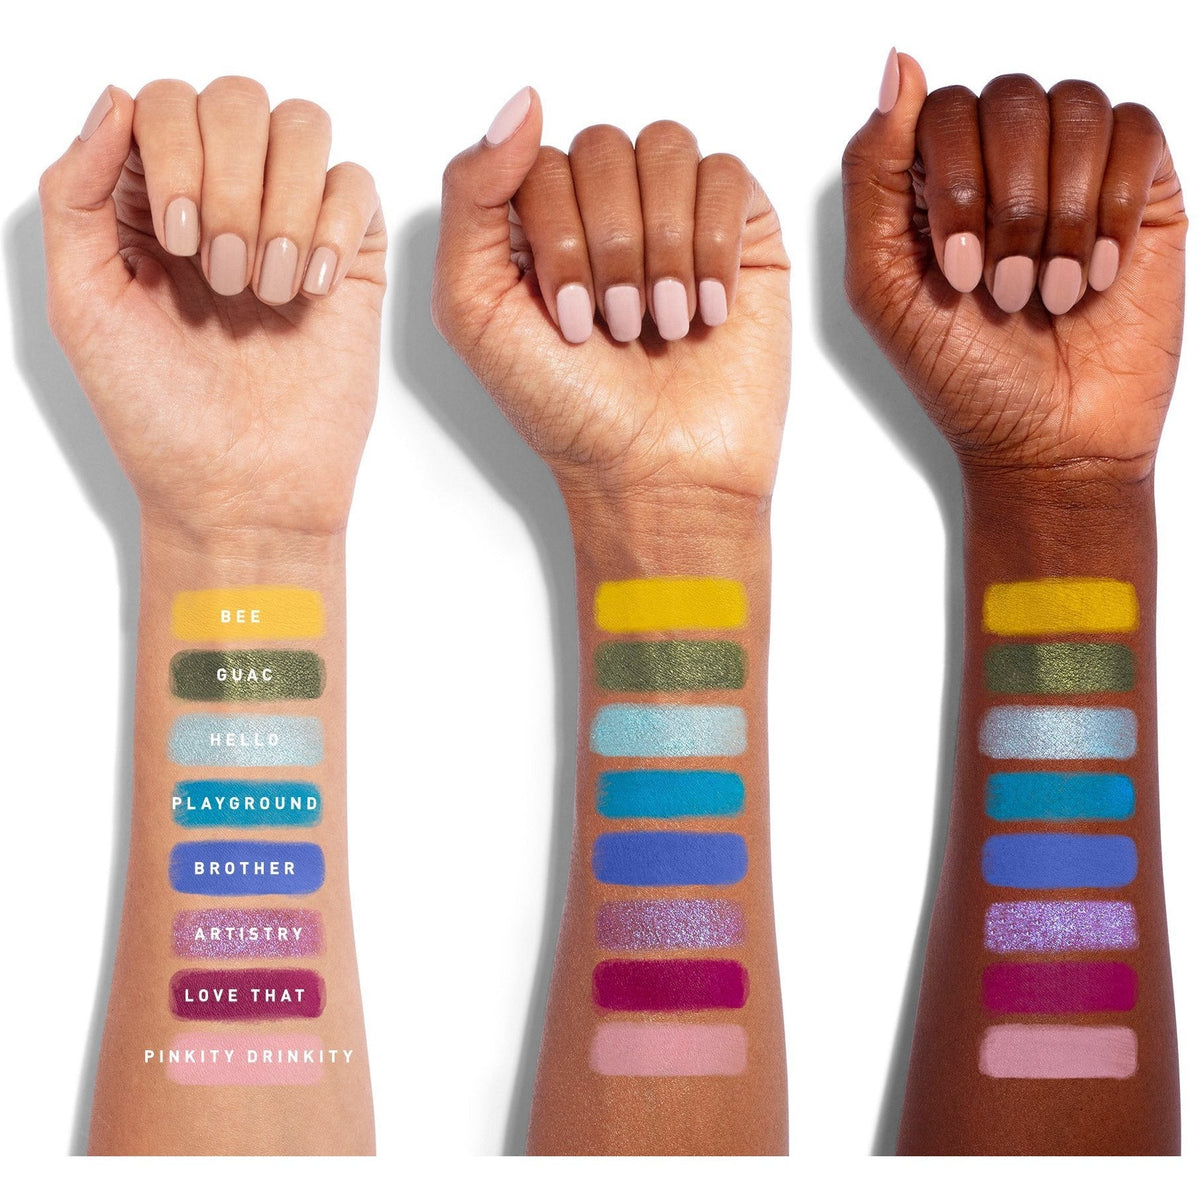 James_Charles_Palette_Arm_Swatches_PDP_ROW4